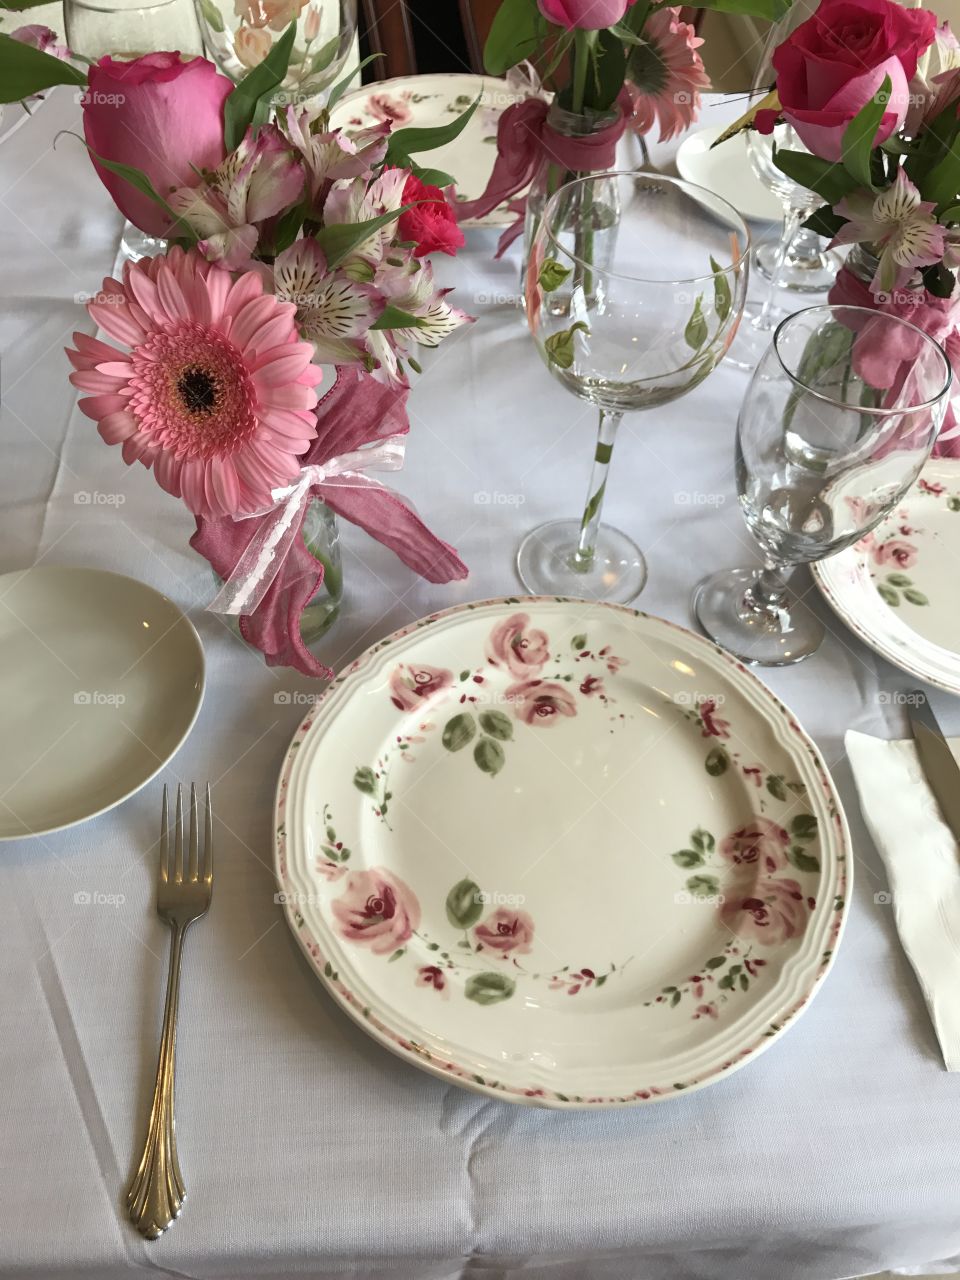 Afternoon tea party with delicious food, flowers plate glasses 